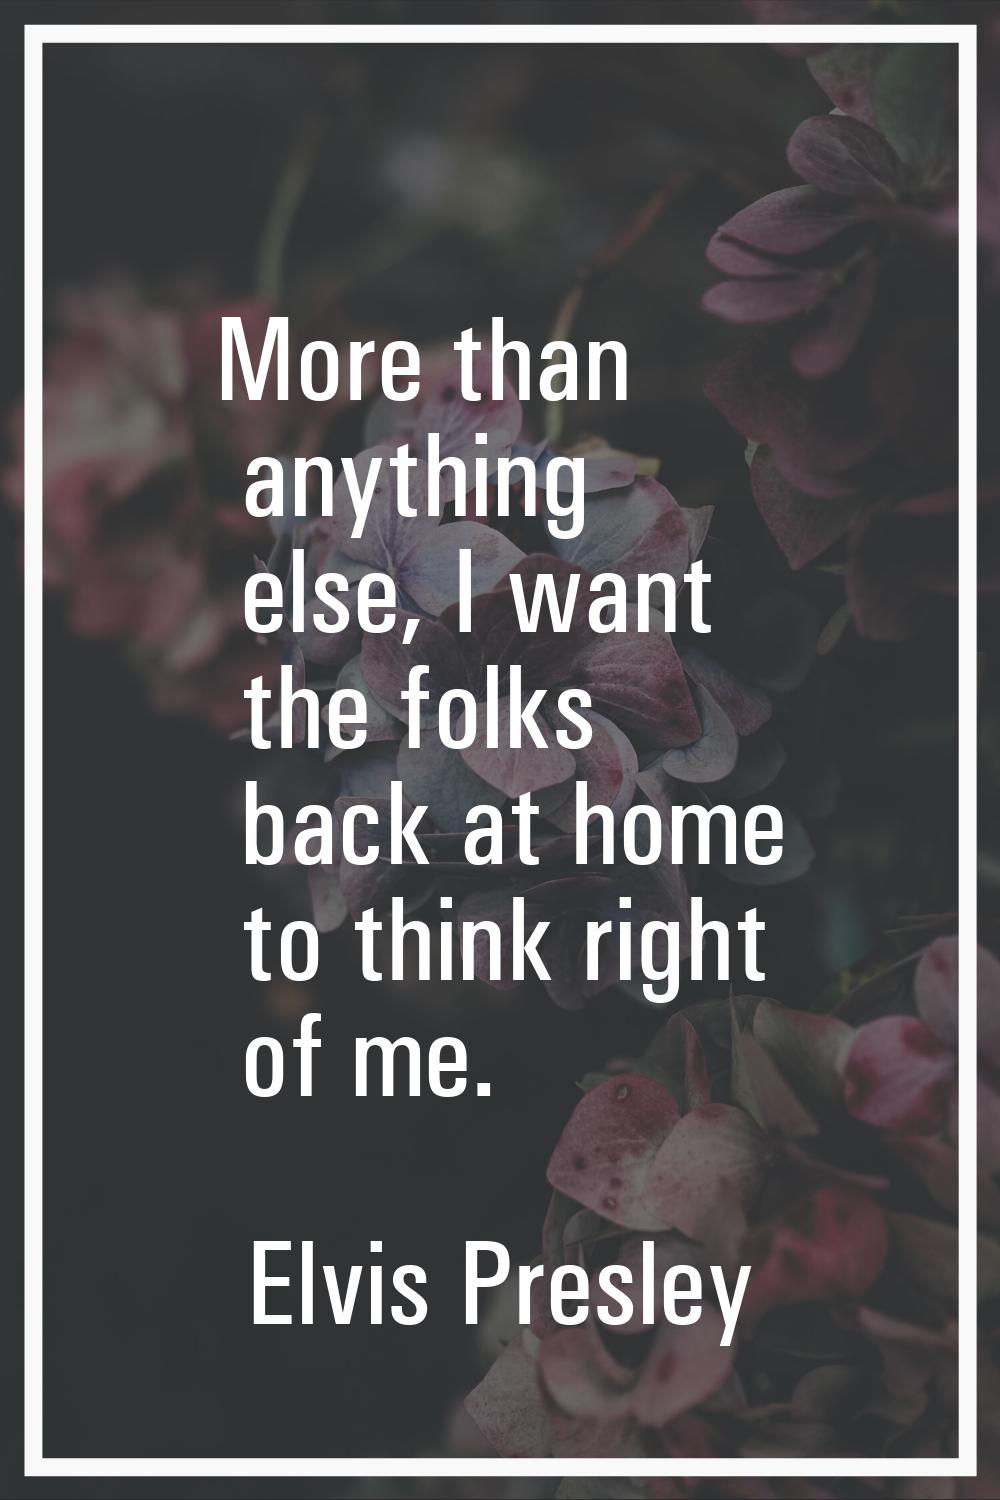 More than anything else, I want the folks back at home to think right of me.